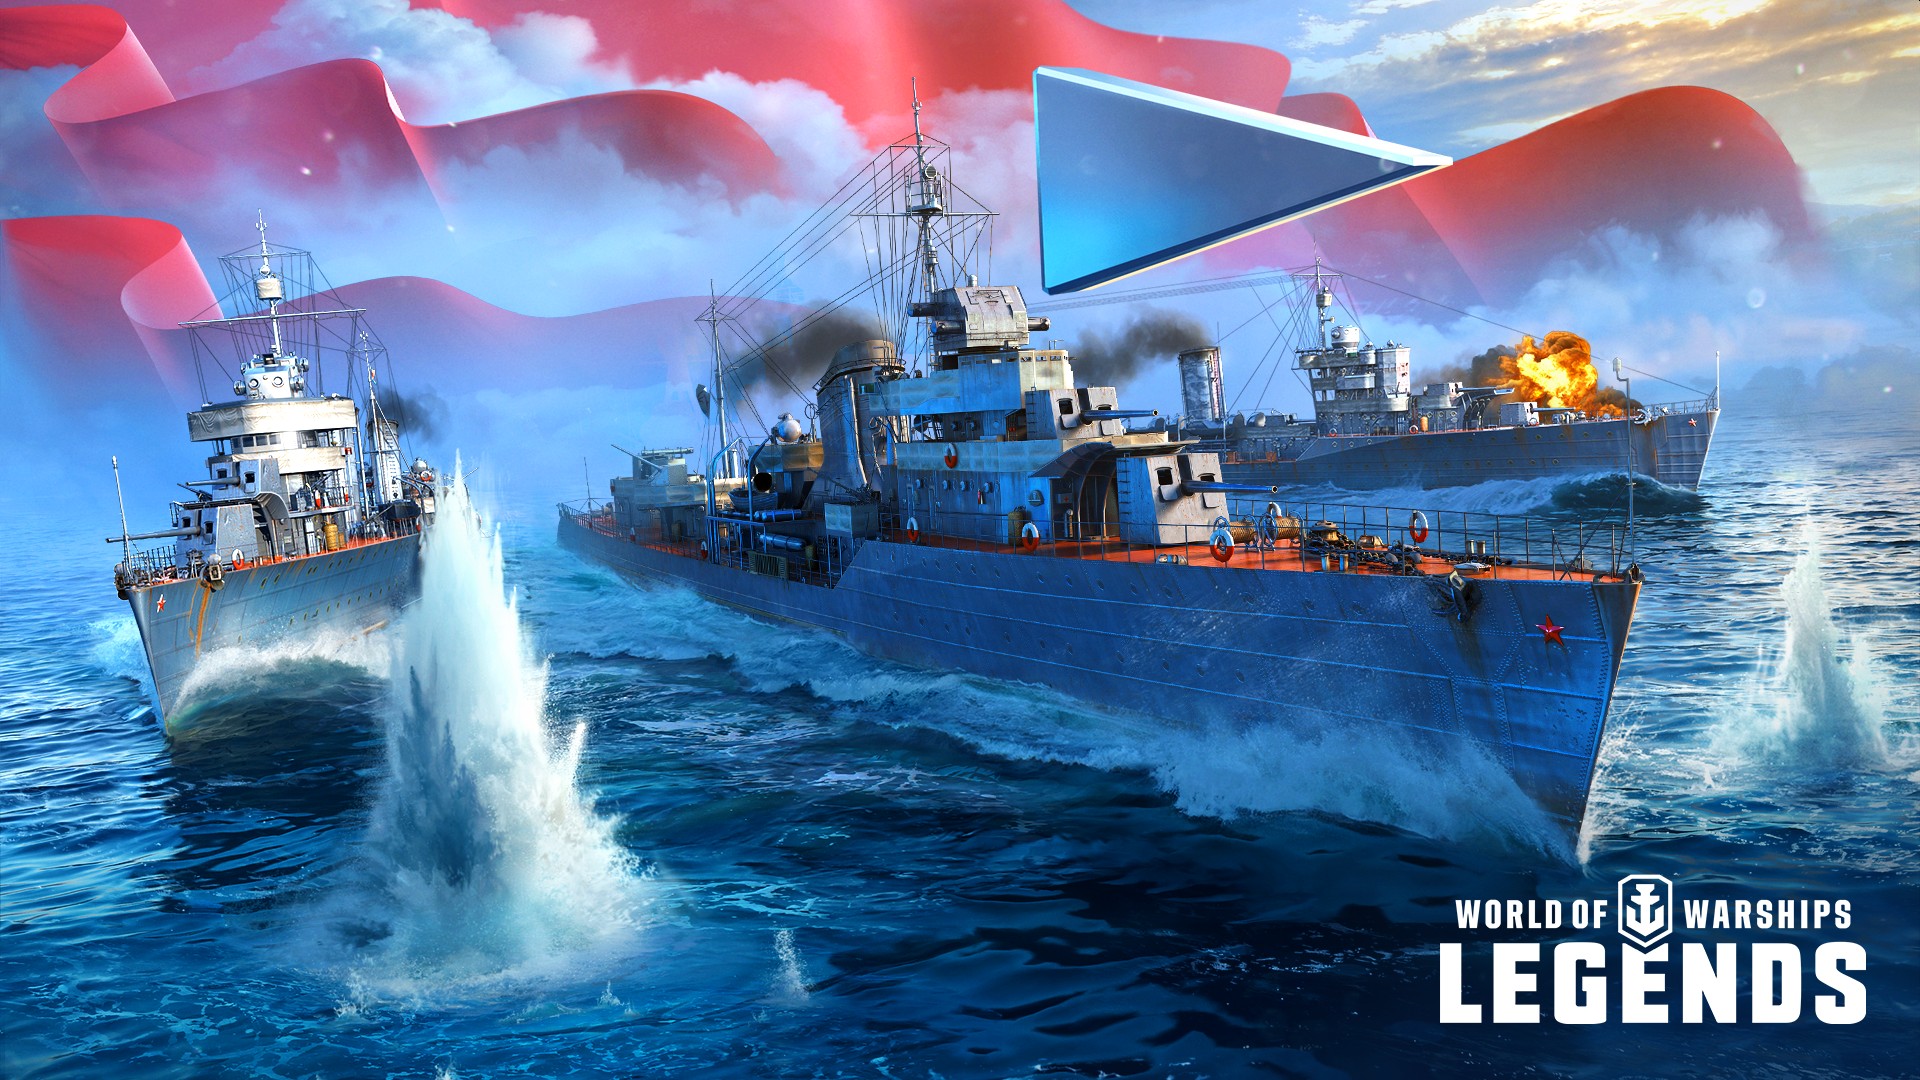 Preview the new World of Warships Legends graphical engine on Xbox One